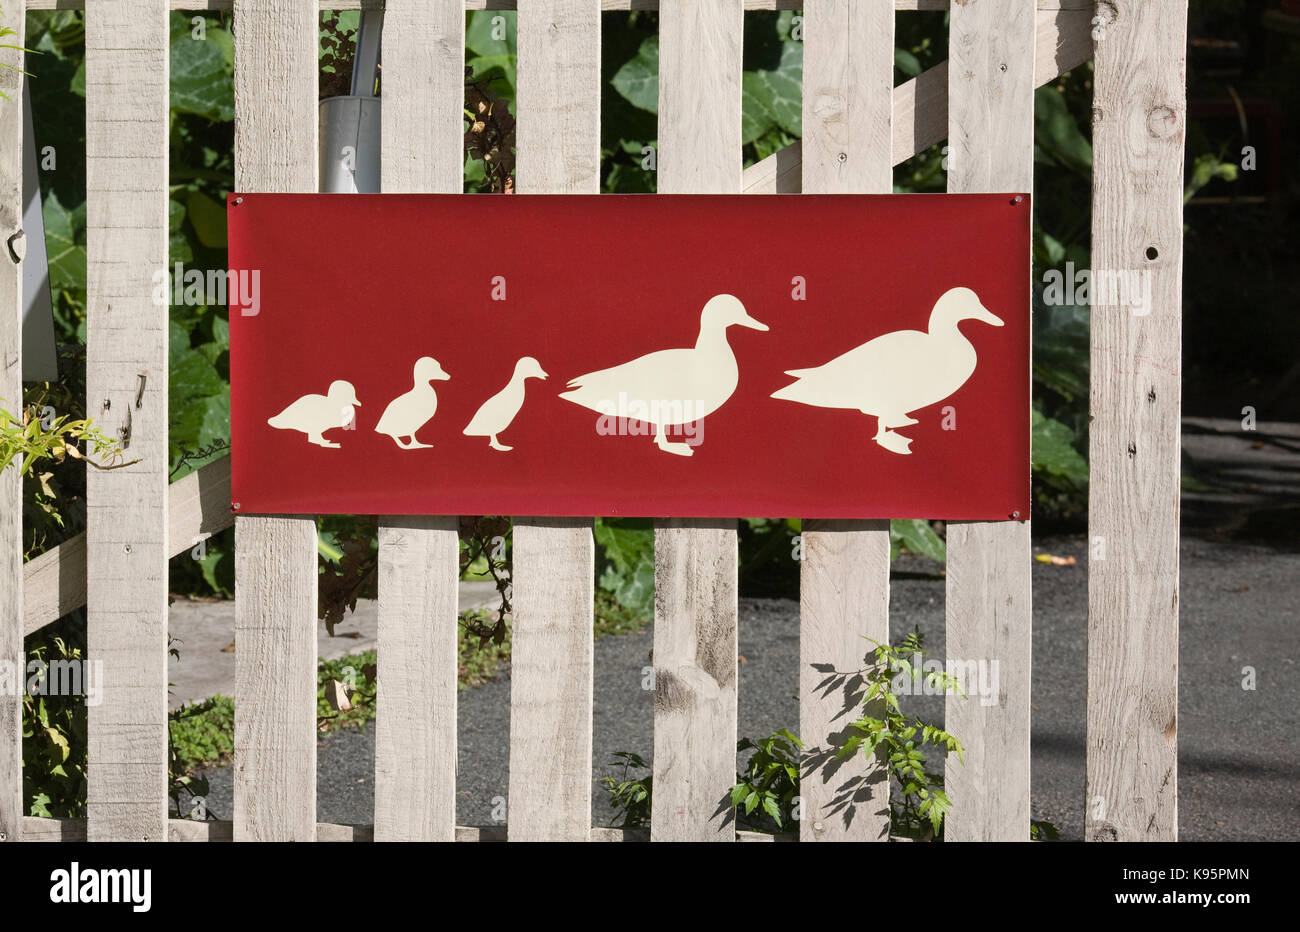 Ducks and ducklings crossing sign. Stock Photo